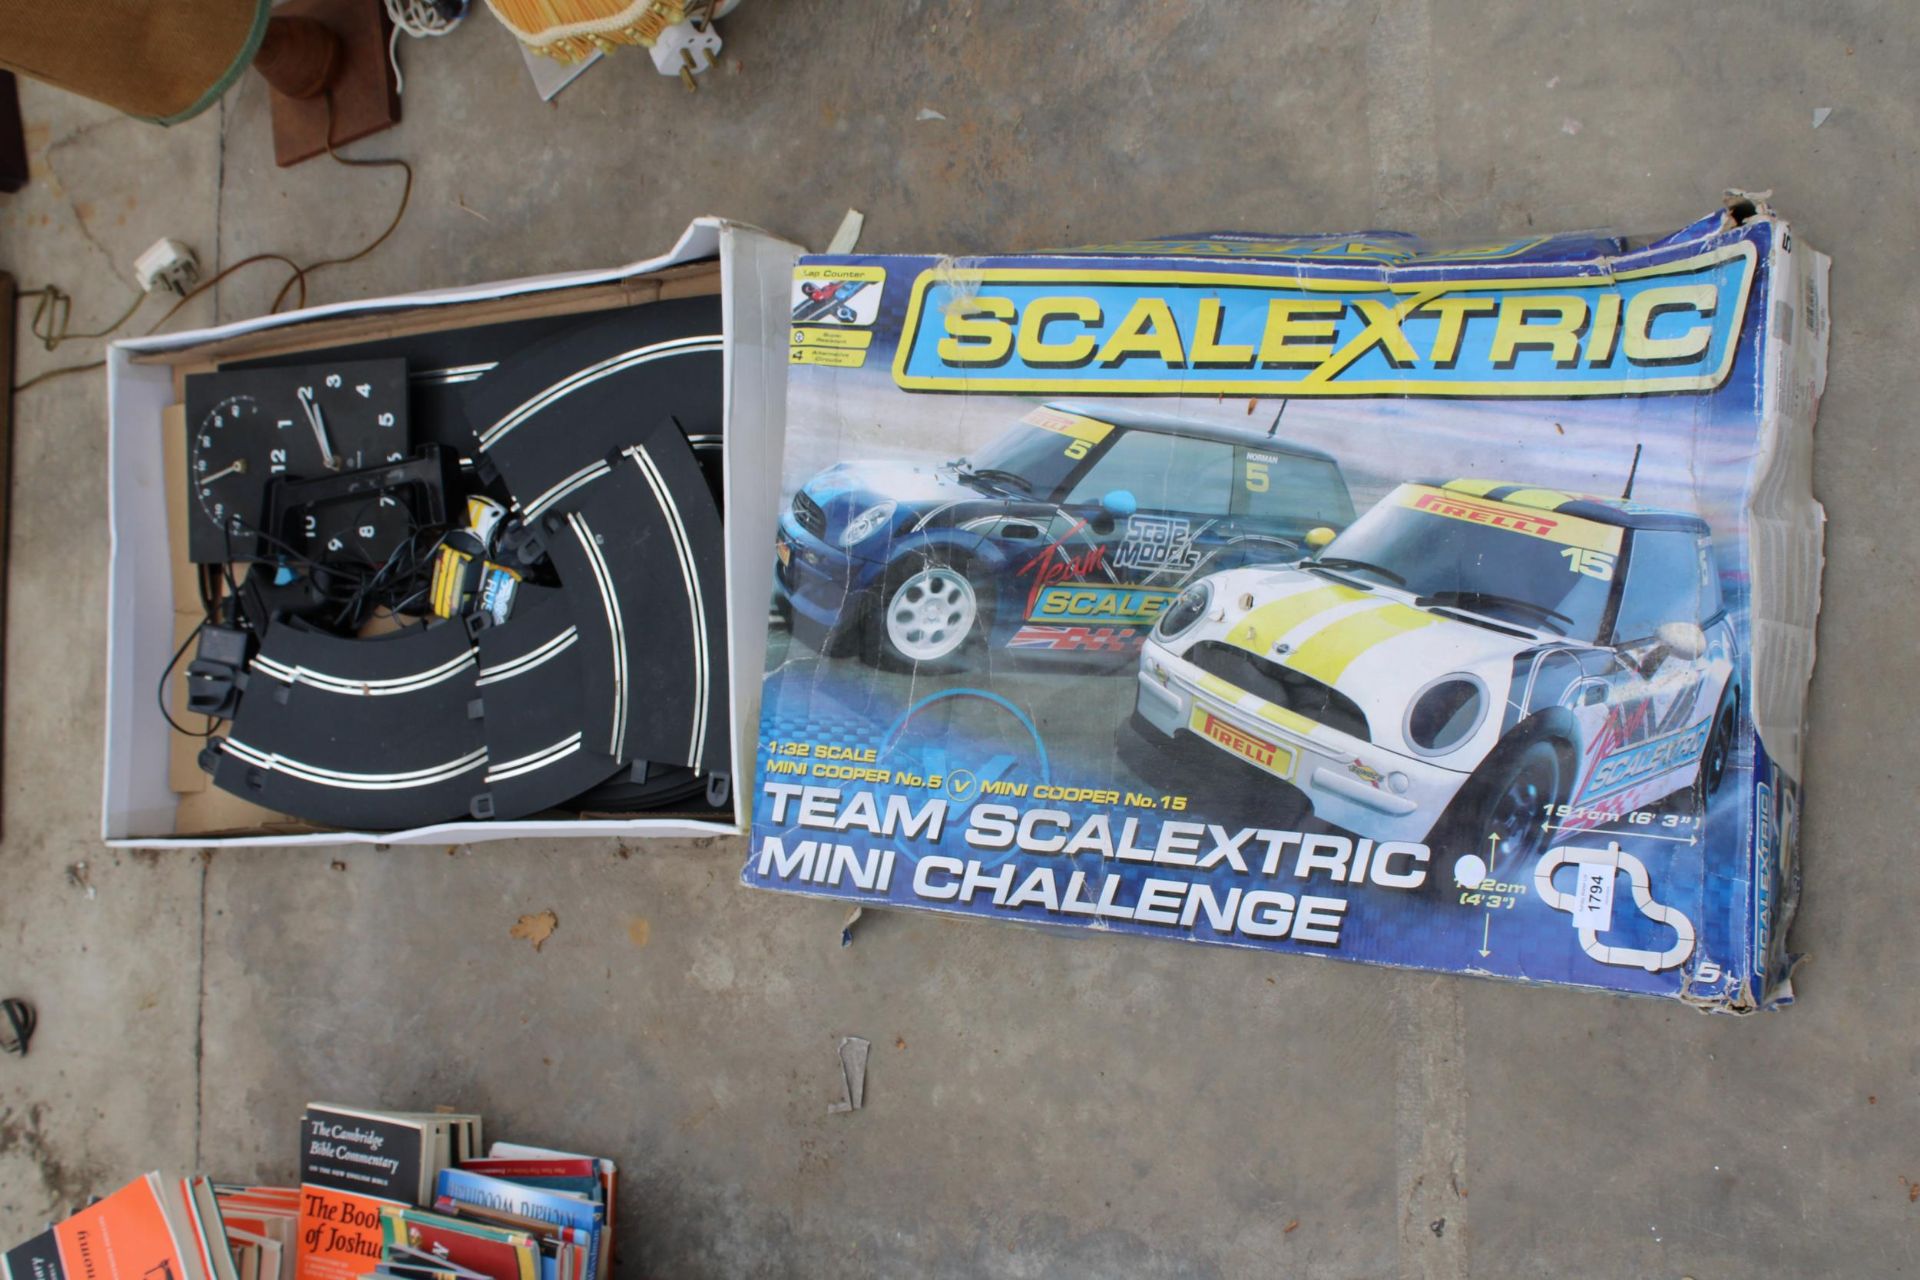 A SCALEXTRIC SET COMPLETE WITH TWO CARS